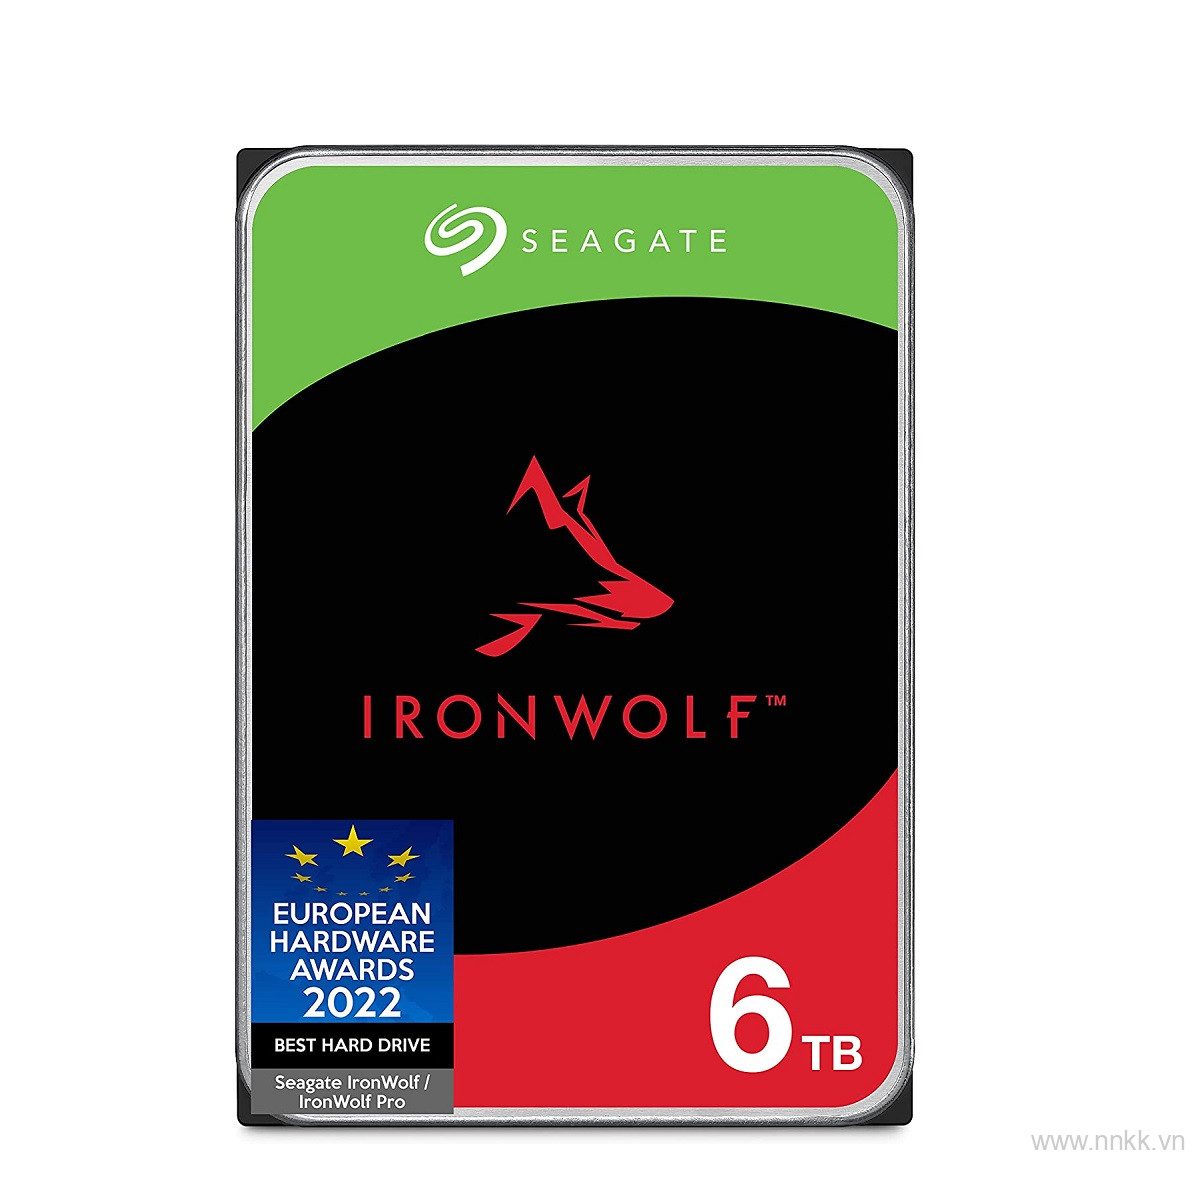 Ổ cứng 3.5 inch HDD 6TB SEAGATE IronWolf ST6000VN001